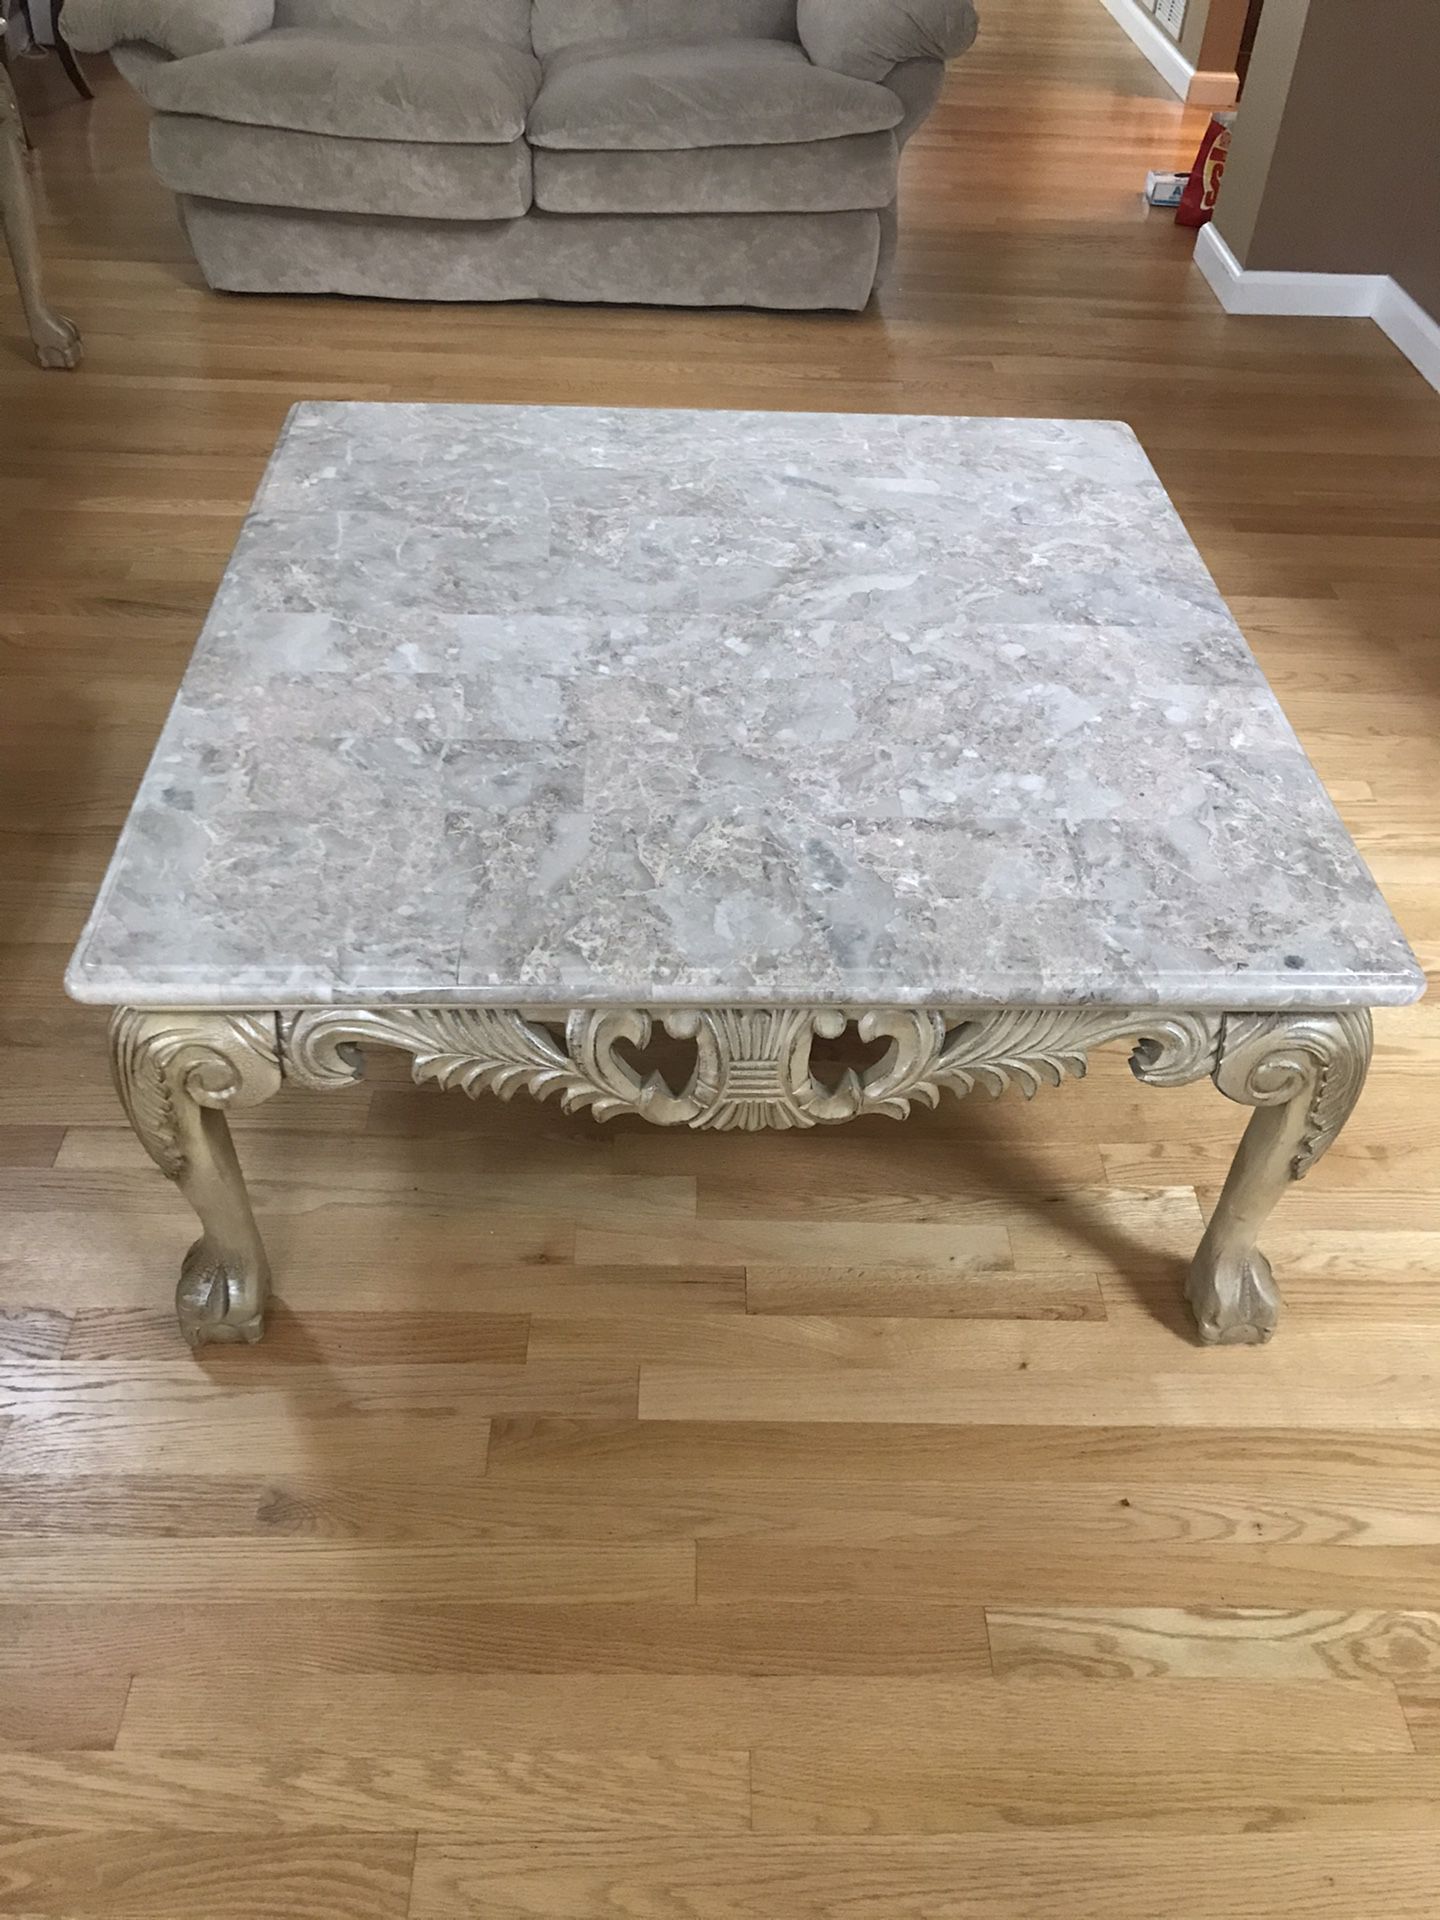 2 Marble End Tables and a matching Coffee Table